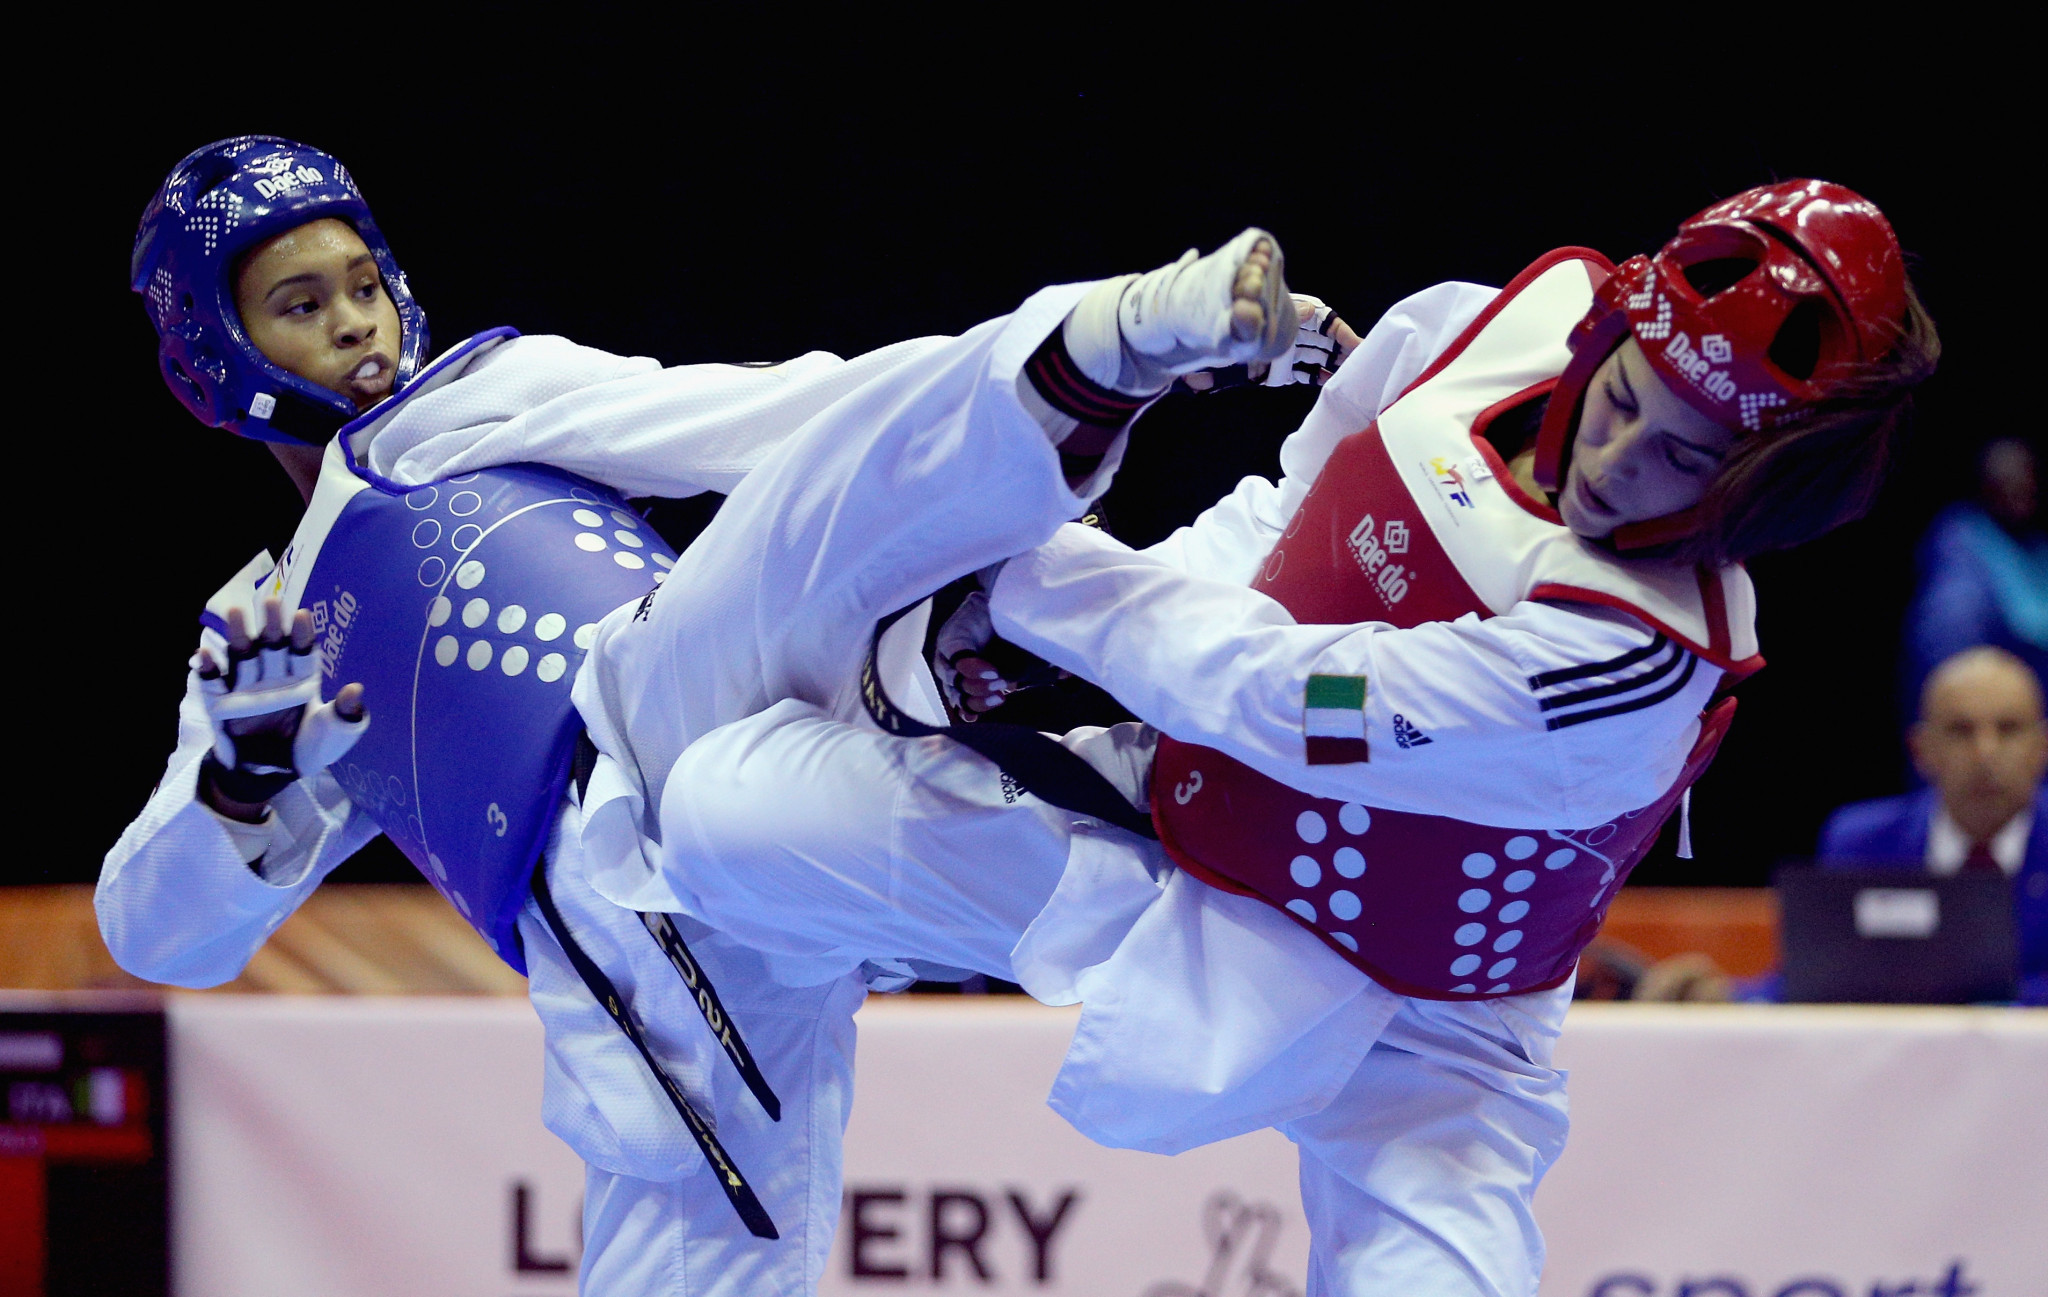 American taekwondo athletes will be looking forward to their home event in Las Vegas ©Getty Images